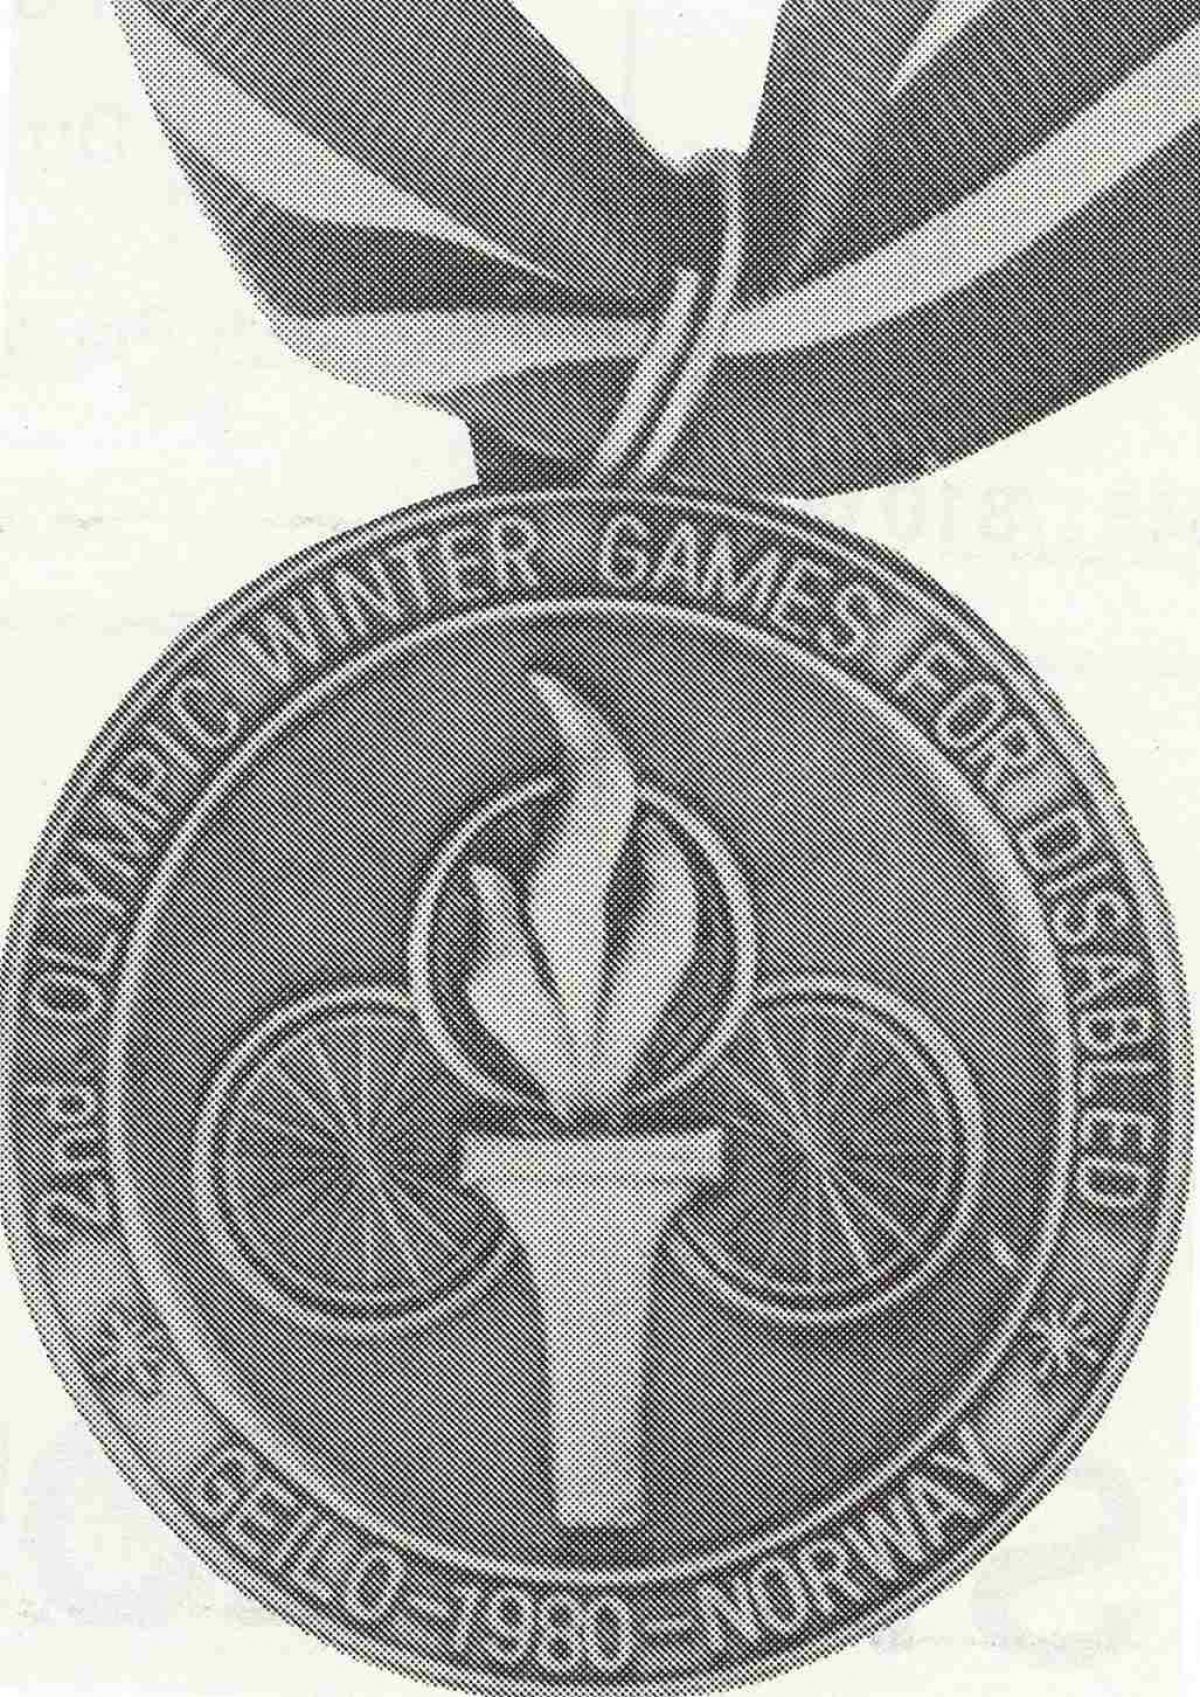 The medals of the Geilo 1980 Paralympic Winter Games